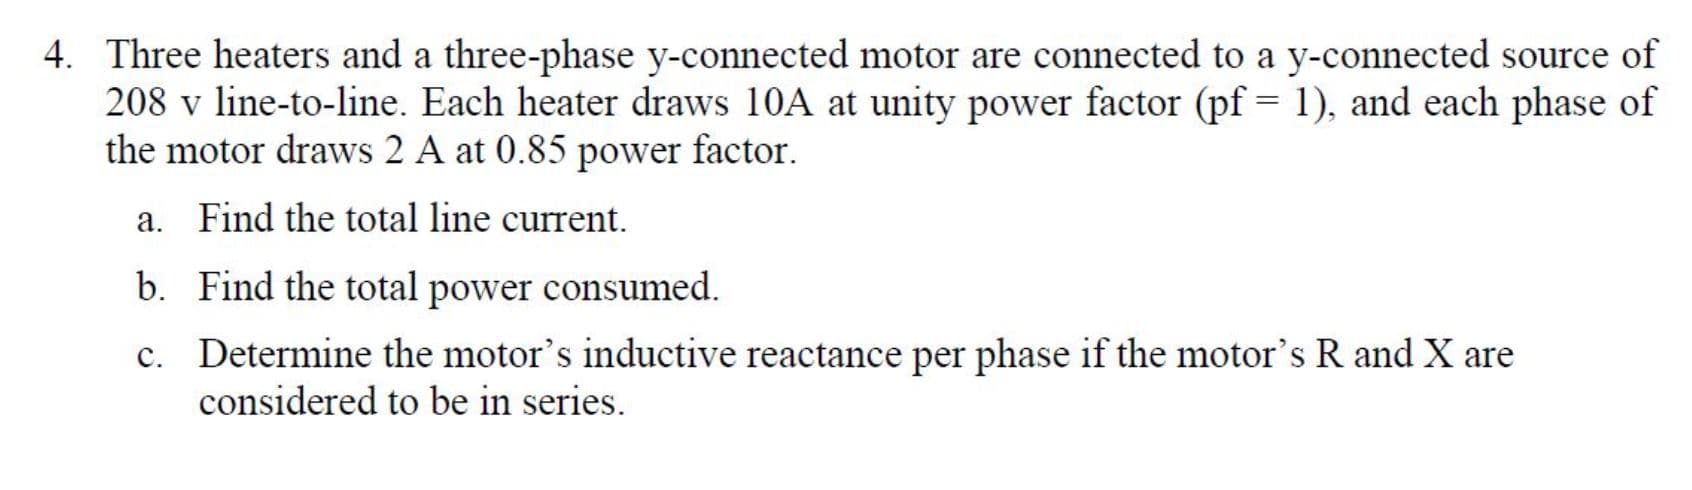 4. Three heaters and a three-phase y-connected motor are connected to a y-connected source of
208 v line-to-line. Each heater draws 10A at unity power factor (pf 1), and each phase of
the motor draws 2 A at 0.85 power factor
Find the total line current
a.
Find the total power consumed
b.
Determine the motor's inductive reactance per phase if the motor's R and X are
considered to be in series
c.
